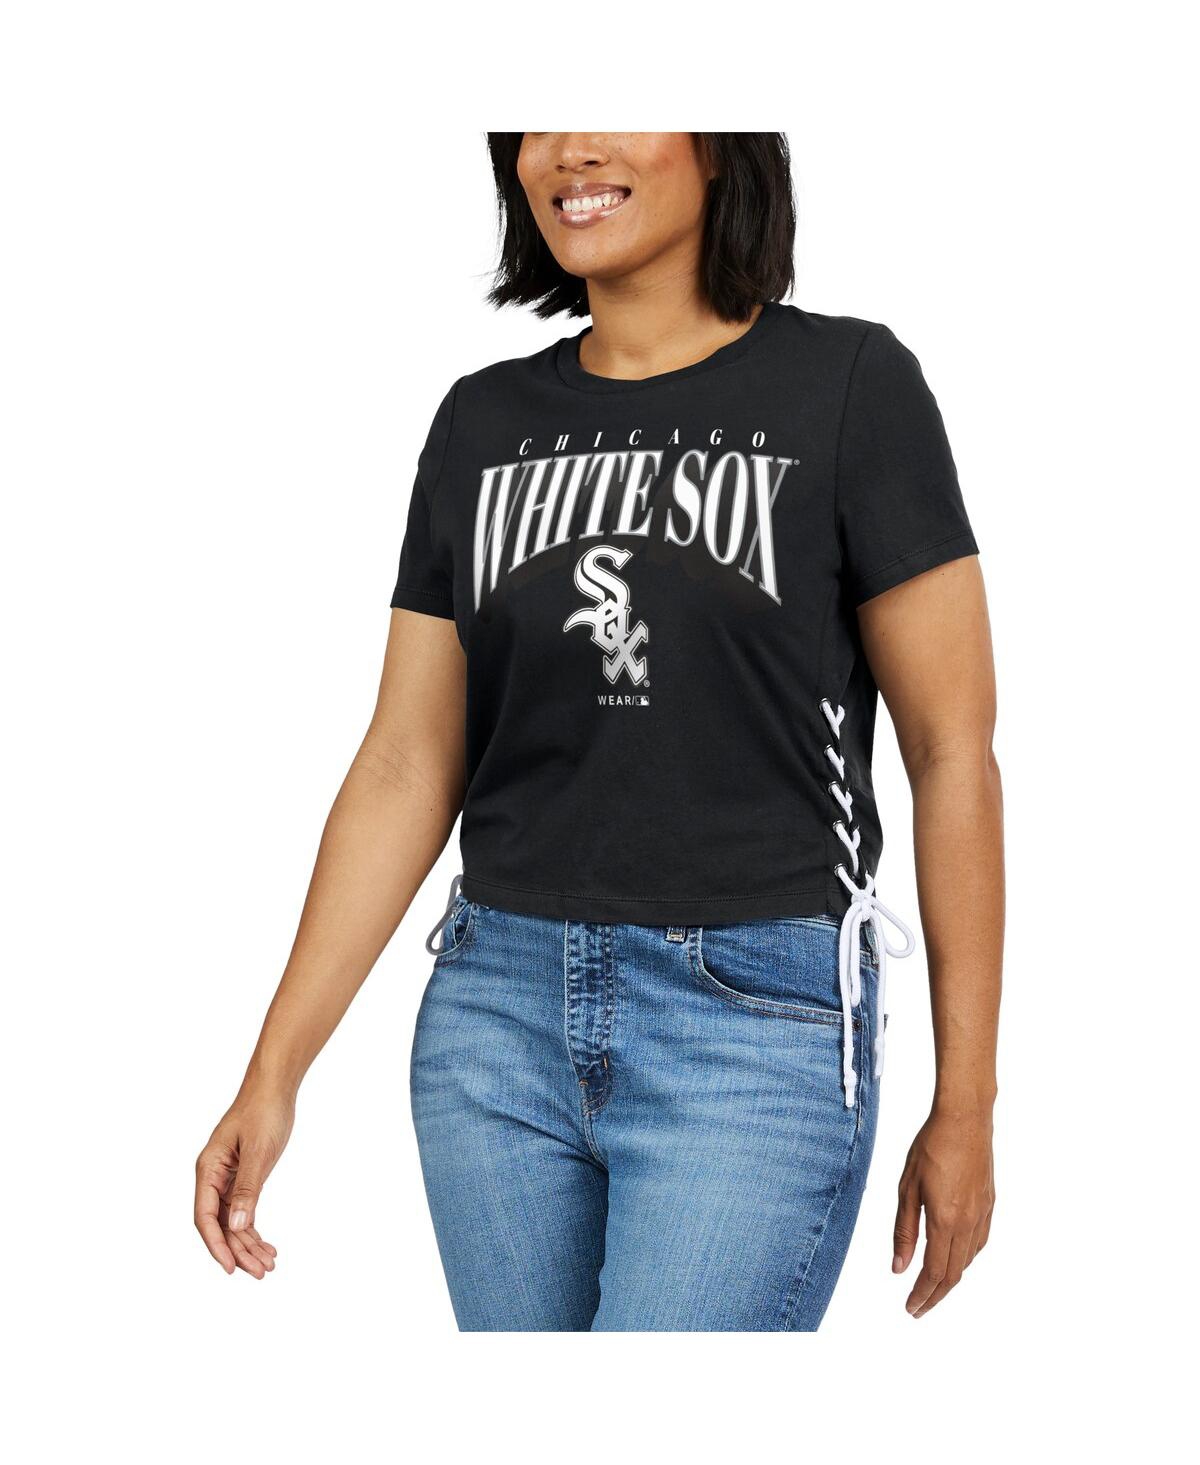 Shop Wear By Erin Andrews Women's  Black Chicago White Sox Side Lace-up Cropped T-shirt